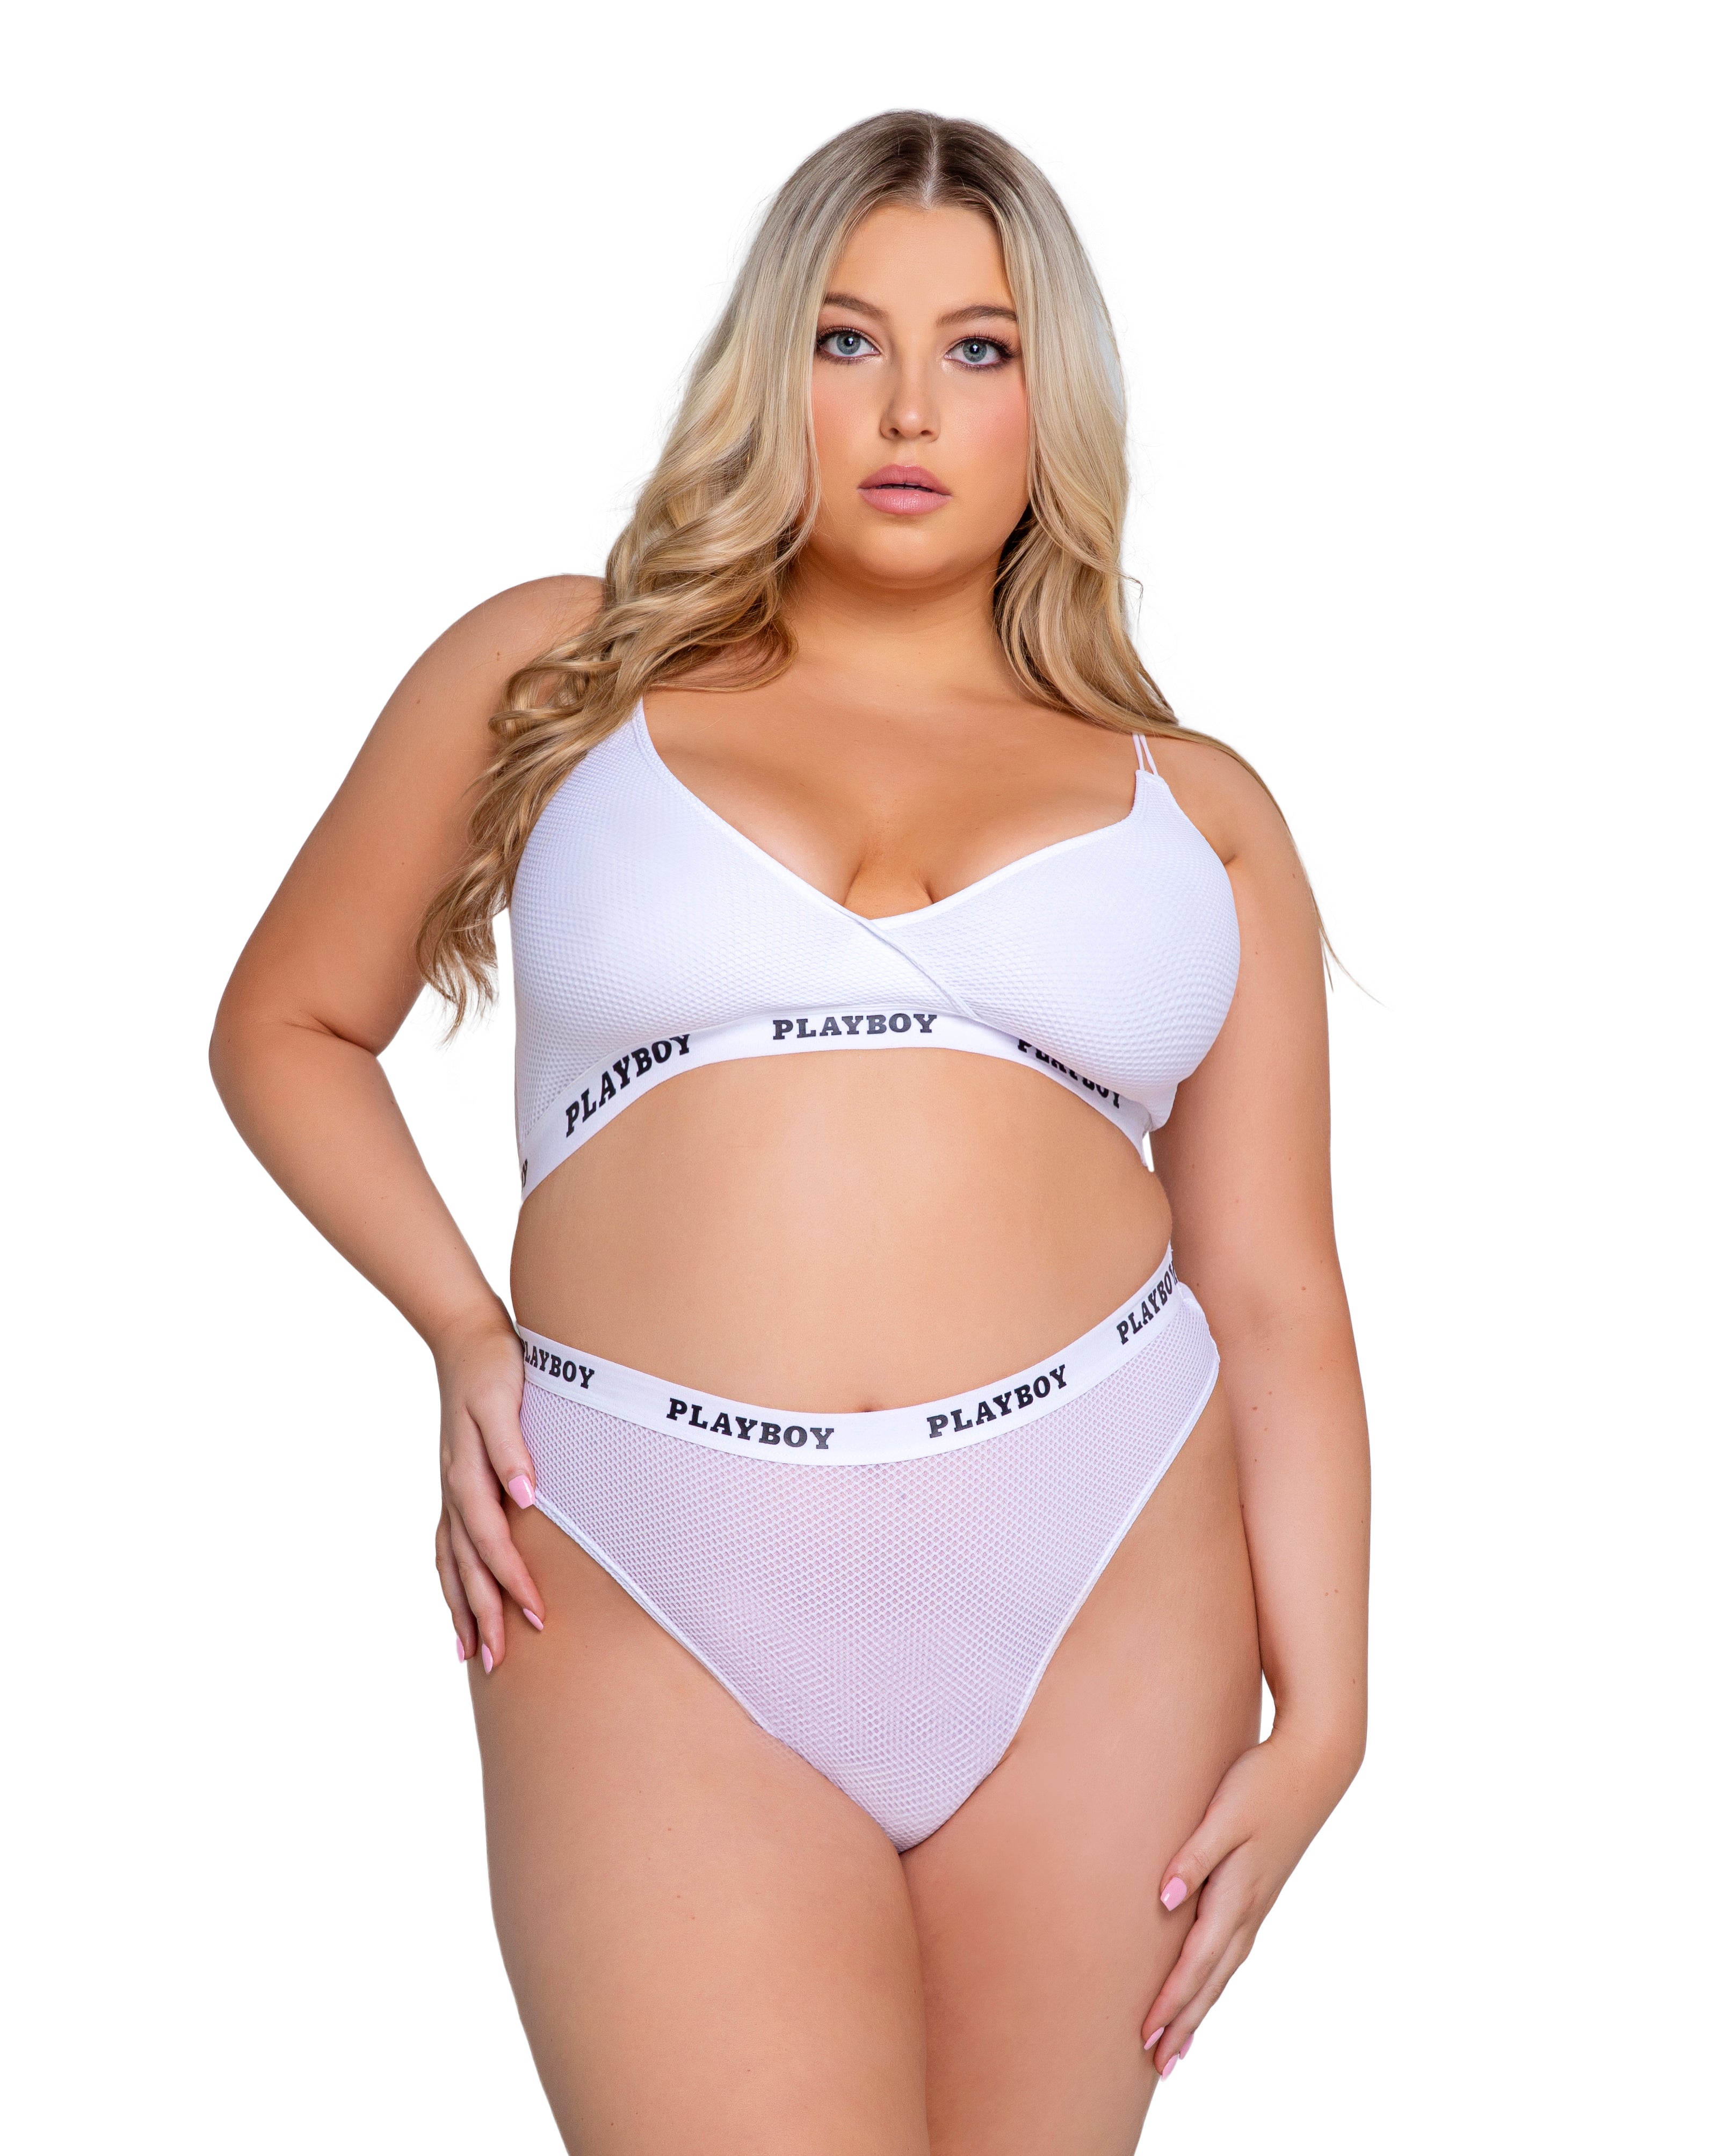 PLAYBOY Intimates 2 Pack Tangas No Panty Lines 2PKTG054, White, M